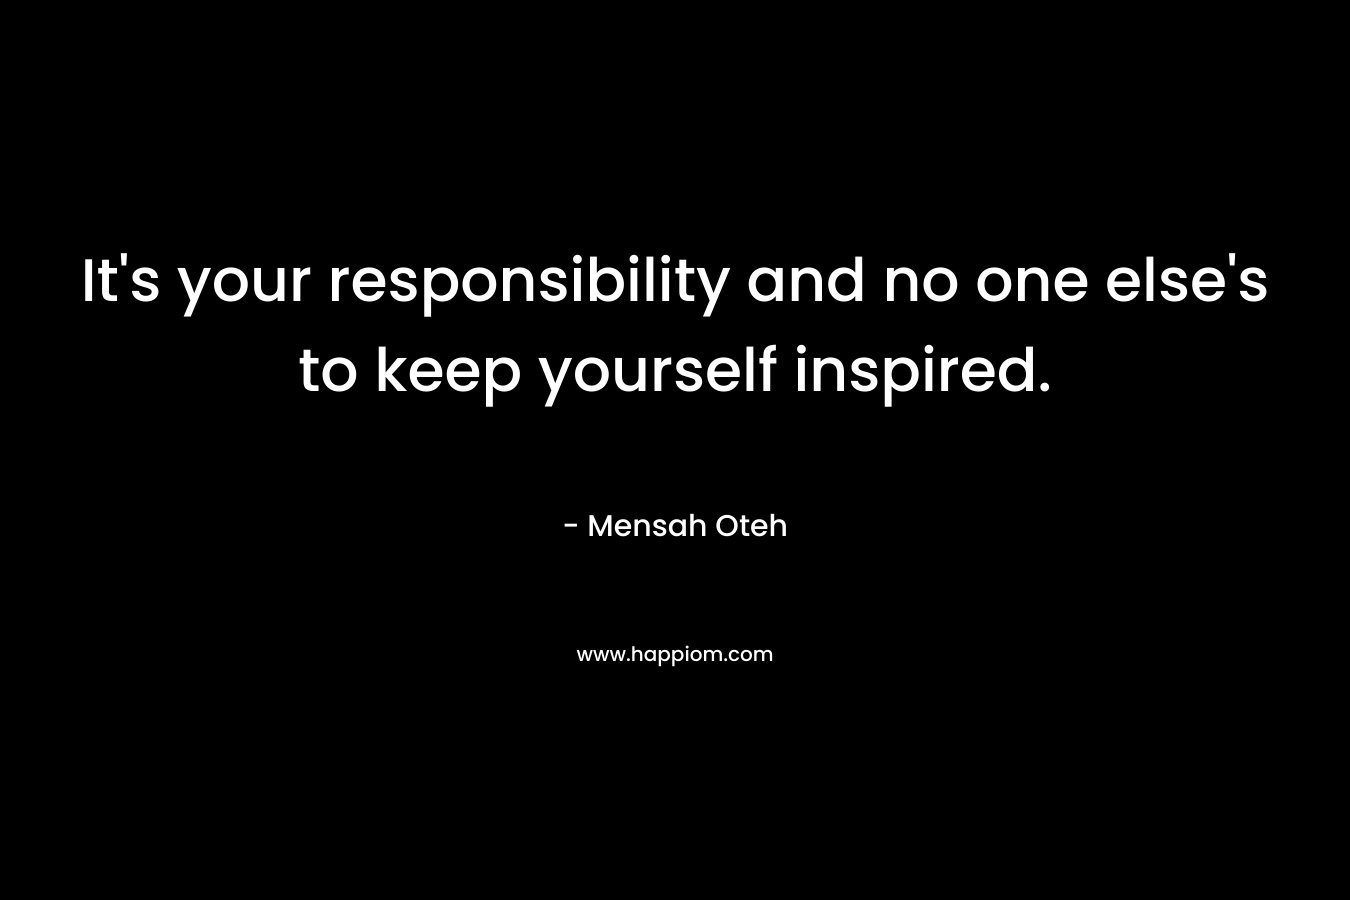 It's your responsibility and no one else's to keep yourself inspired.